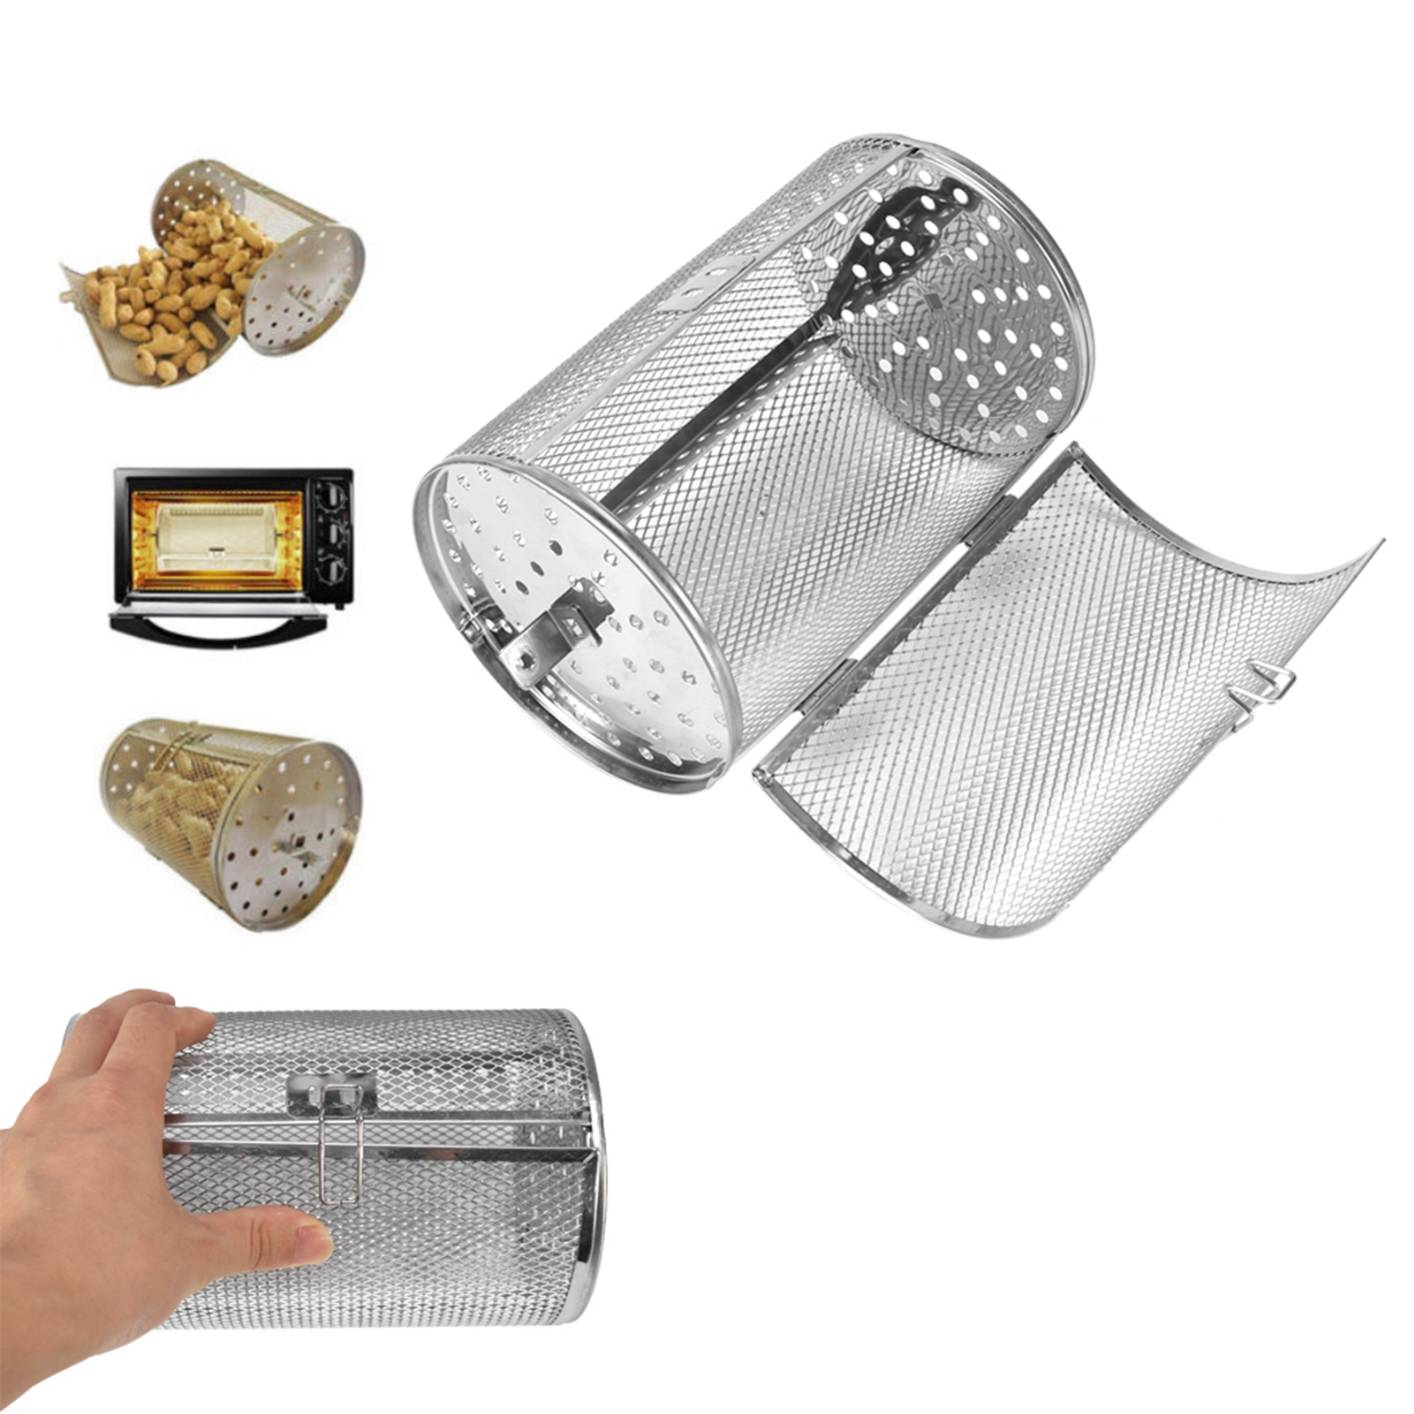 12*18cm Stainless Steel Bakeware Oven Roast Baking Rotary Nuts Beans Peanut Basket BBQ Grill